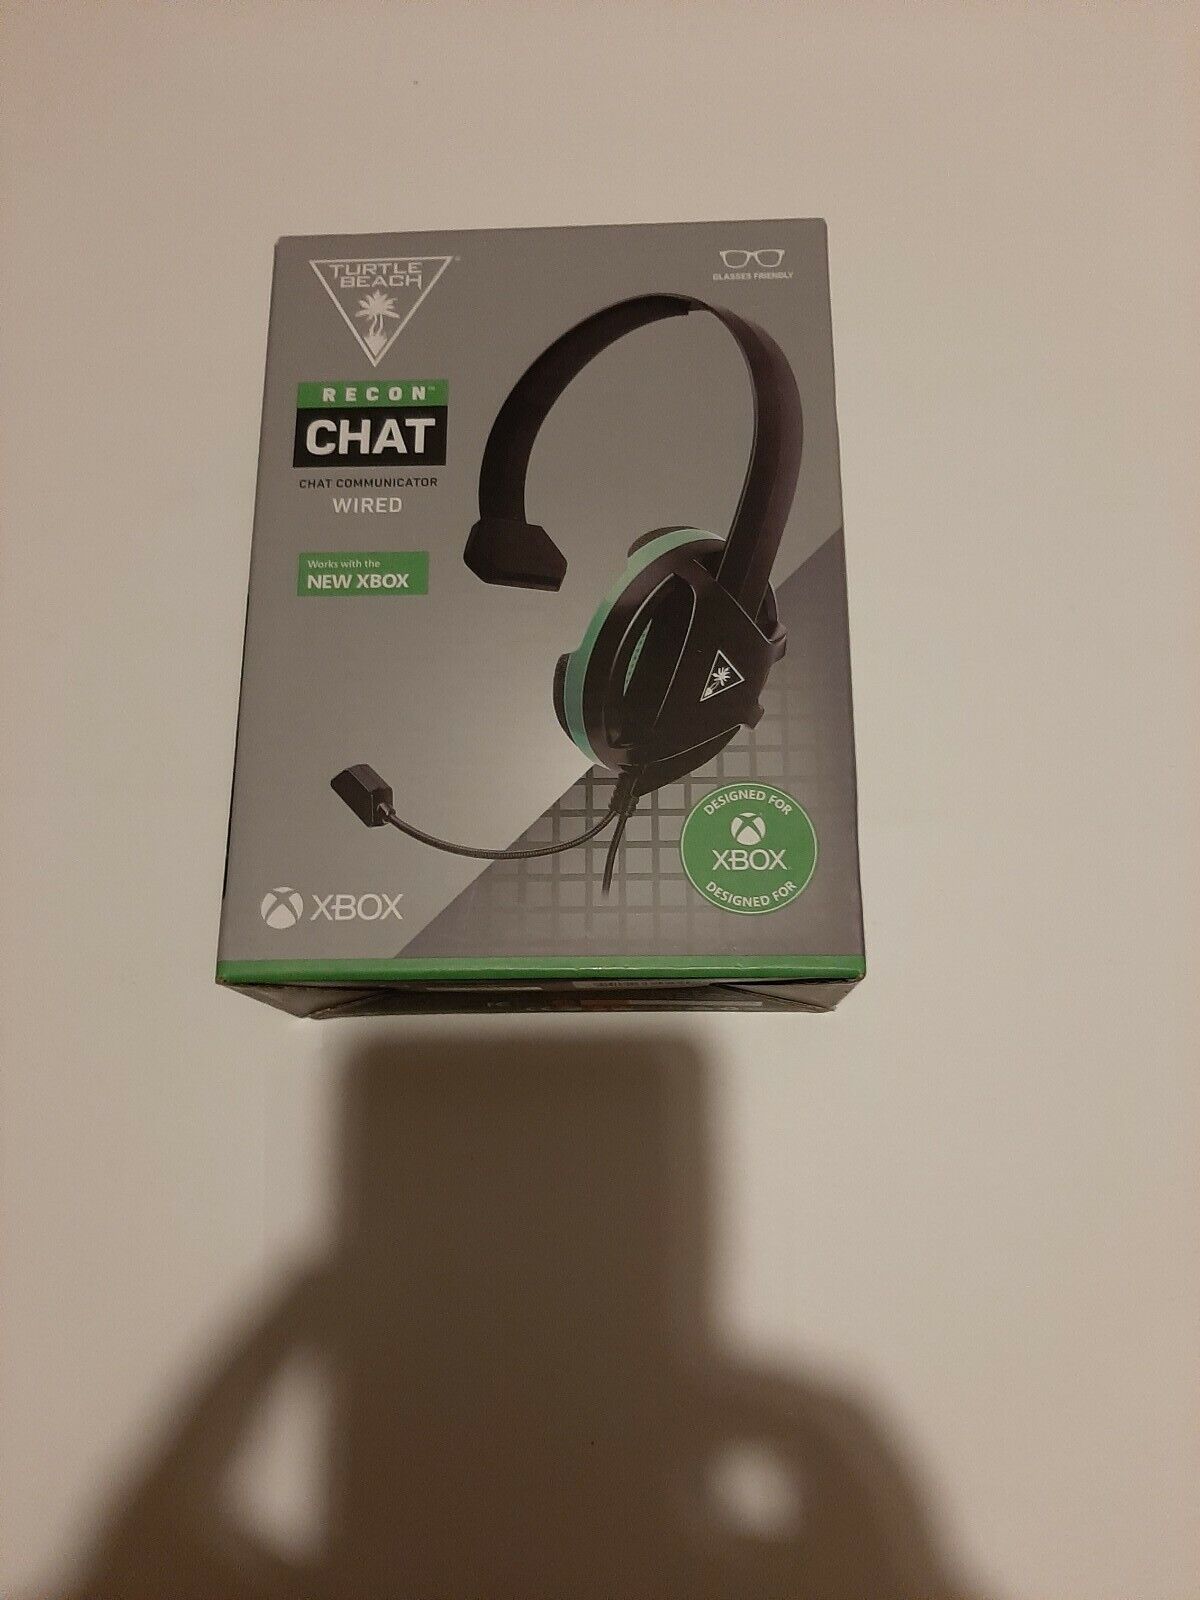 Turtle Beach Recon Chat Wired Gaming Headset For Xbox One Series X Black  /green | eBay